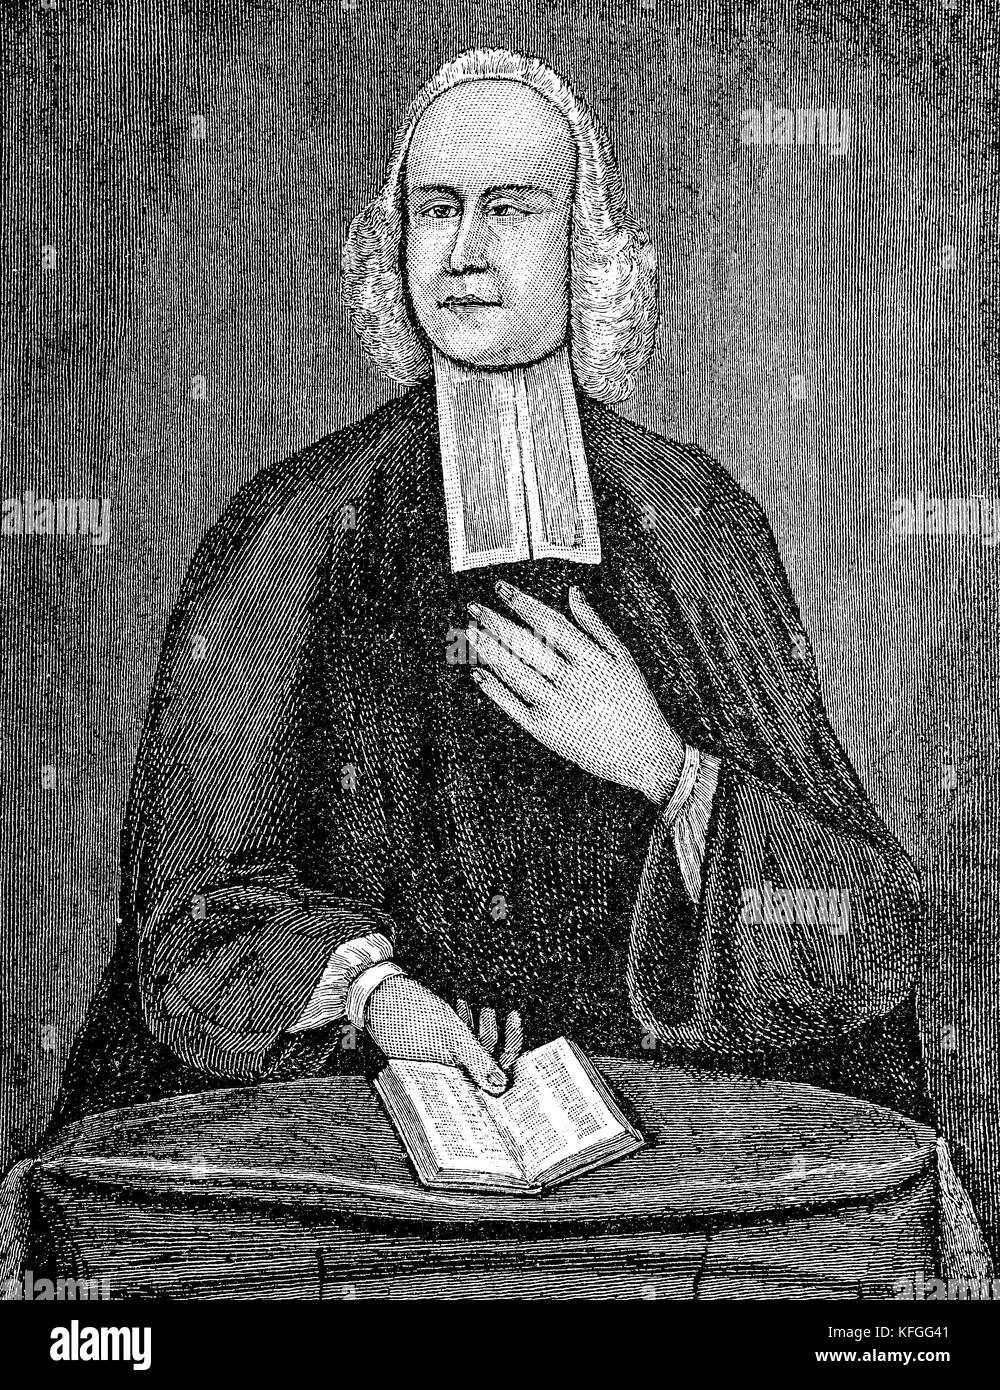 George Whitefield, George Whitfield, English Anglican cleric who was one of the founders of Methodism and the evangelical movement. Methodist George Whitefield 1714-1770 Stock Photo